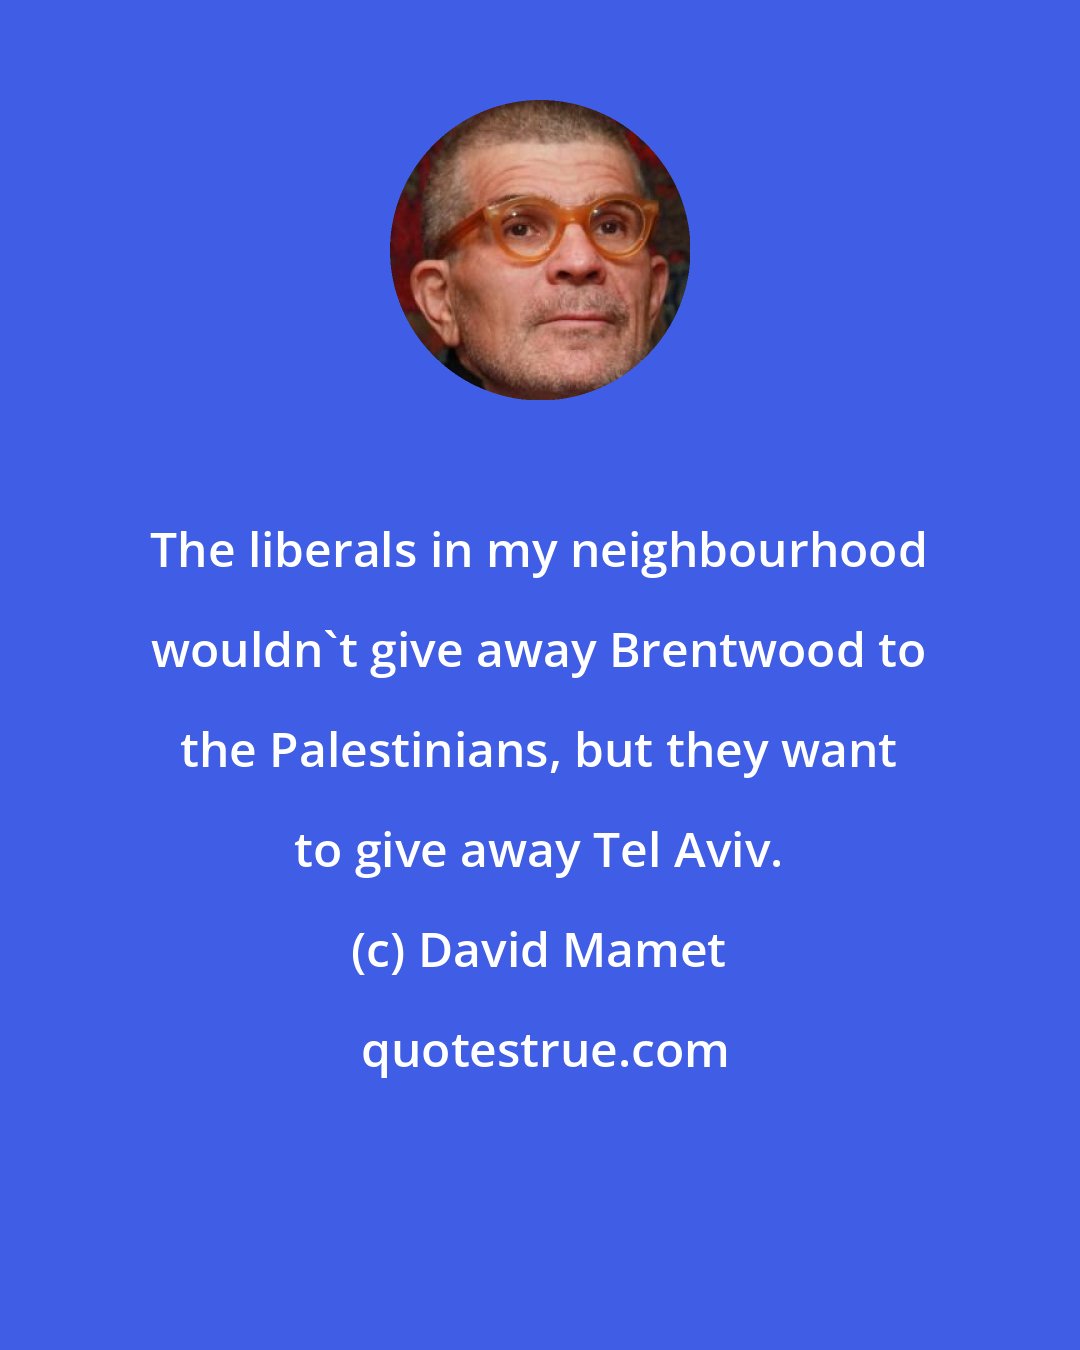 David Mamet: The liberals in my neighbourhood wouldn't give away Brentwood to the Palestinians, but they want to give away Tel Aviv.